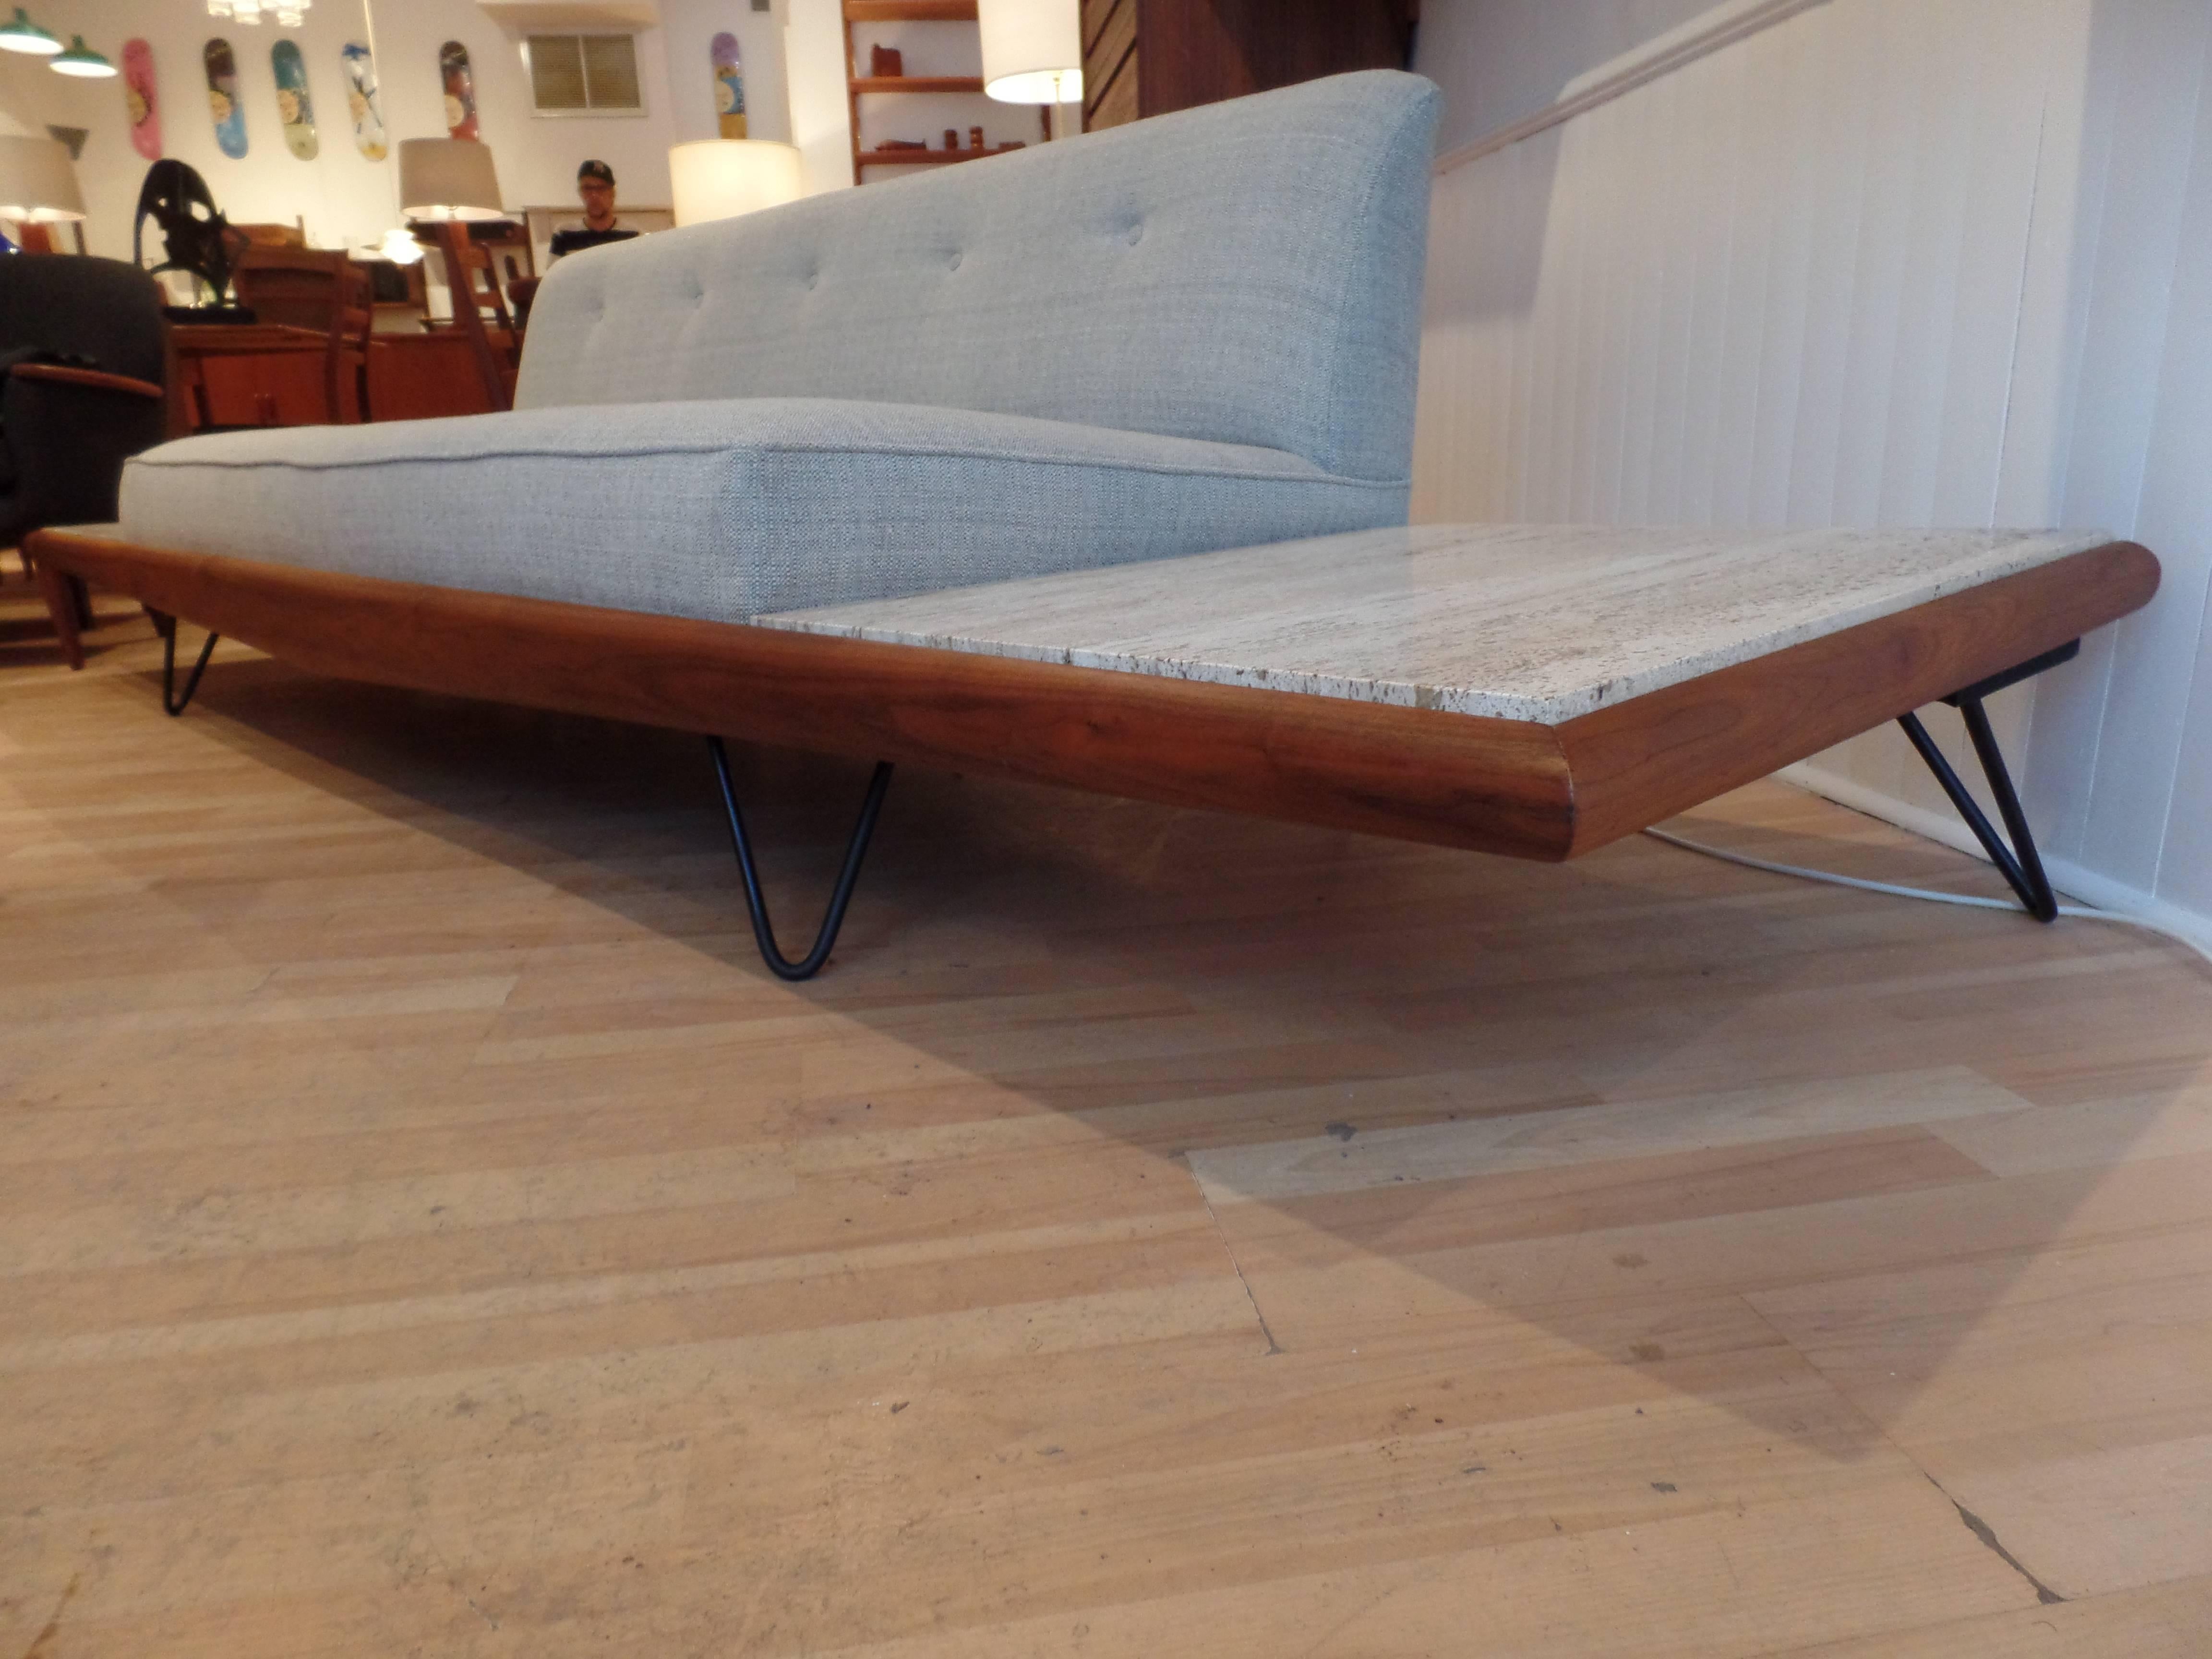 Rare Adrian Pearsall Sofa with End Tables Displayed at Habitat 67, Expo 67 In Good Condition For Sale In New York, NY